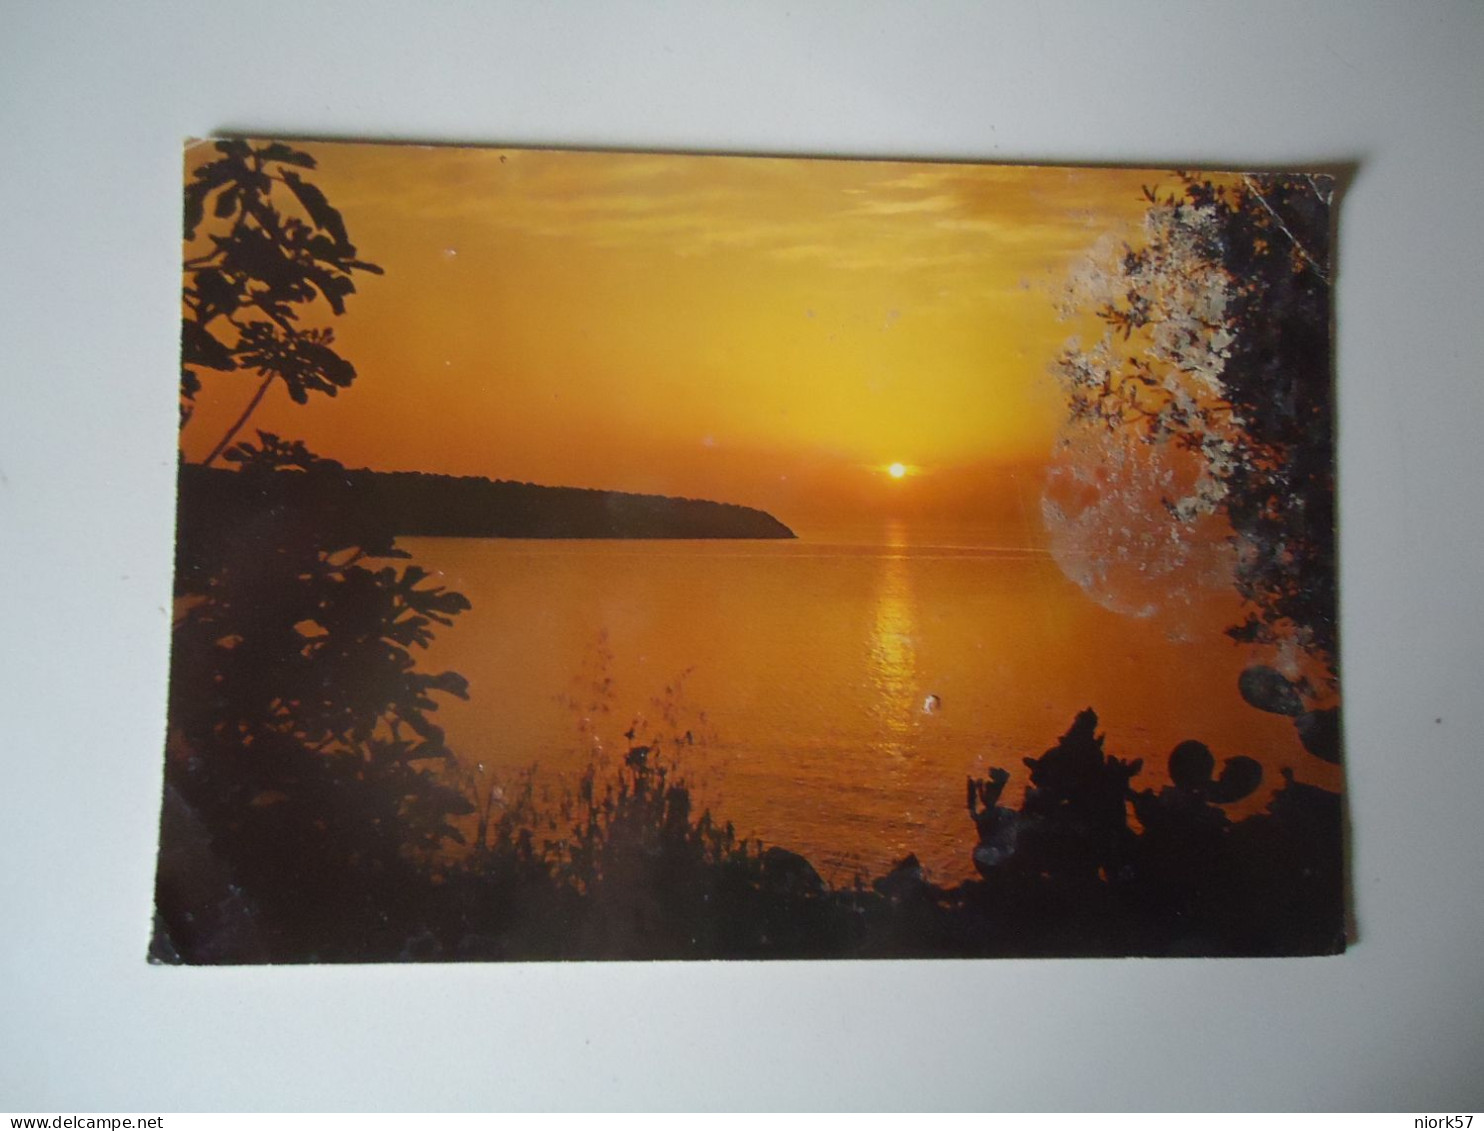 GREECE  PHOTO  GREEK  ISLANDS  SUNRISE  FOR MORE PURCHASES 10% DISCOUNT - Grèce